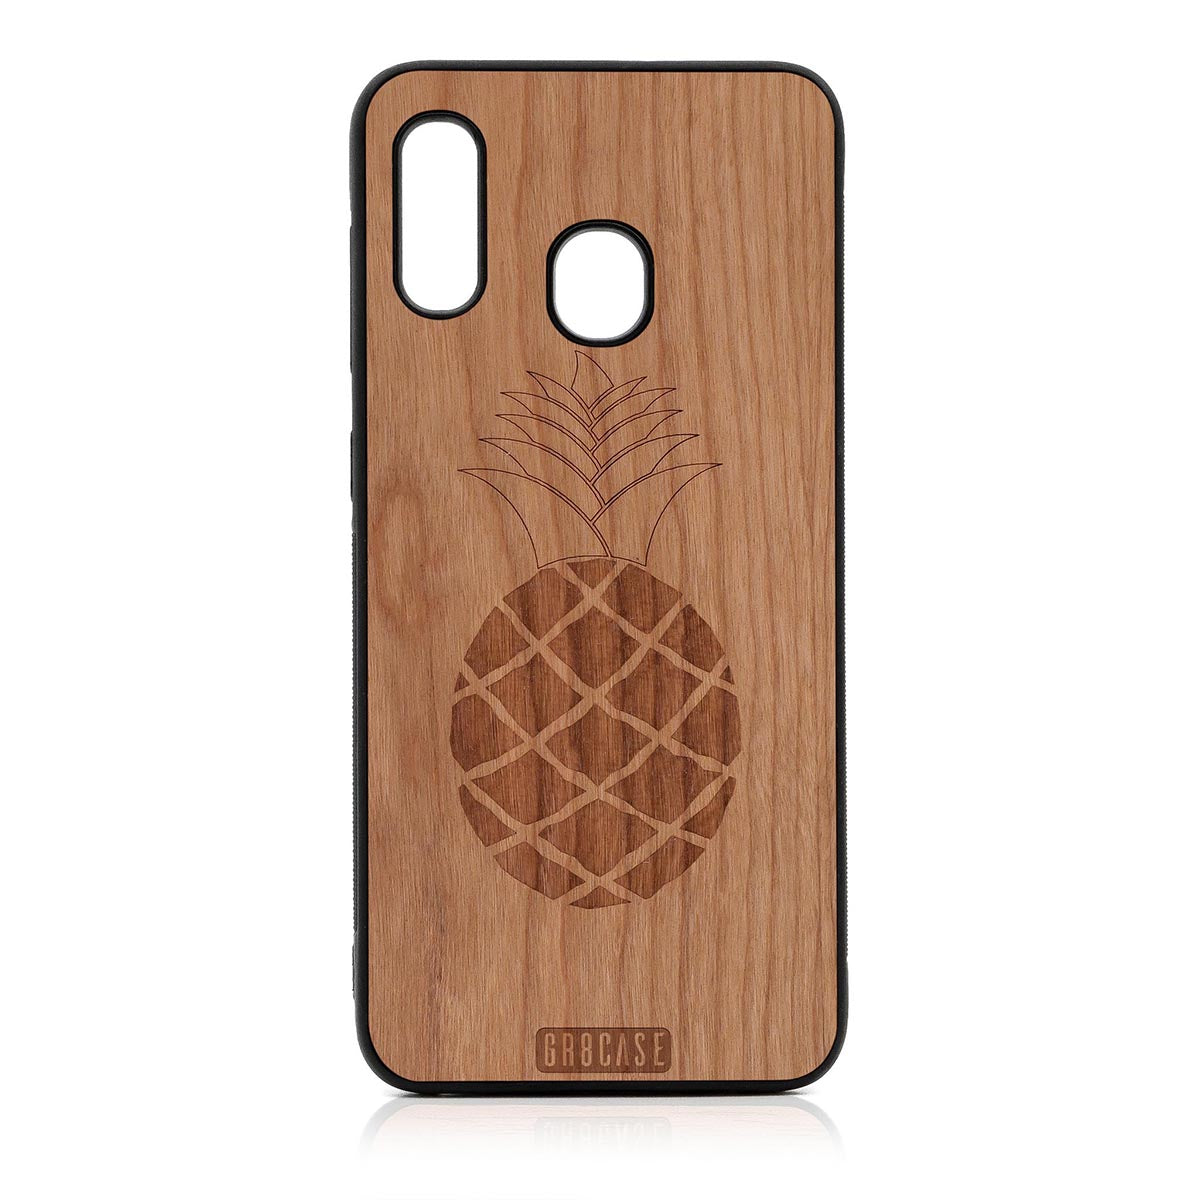 Pineapple Design Wood Case For Samsung Galaxy A20 by GR8CASE